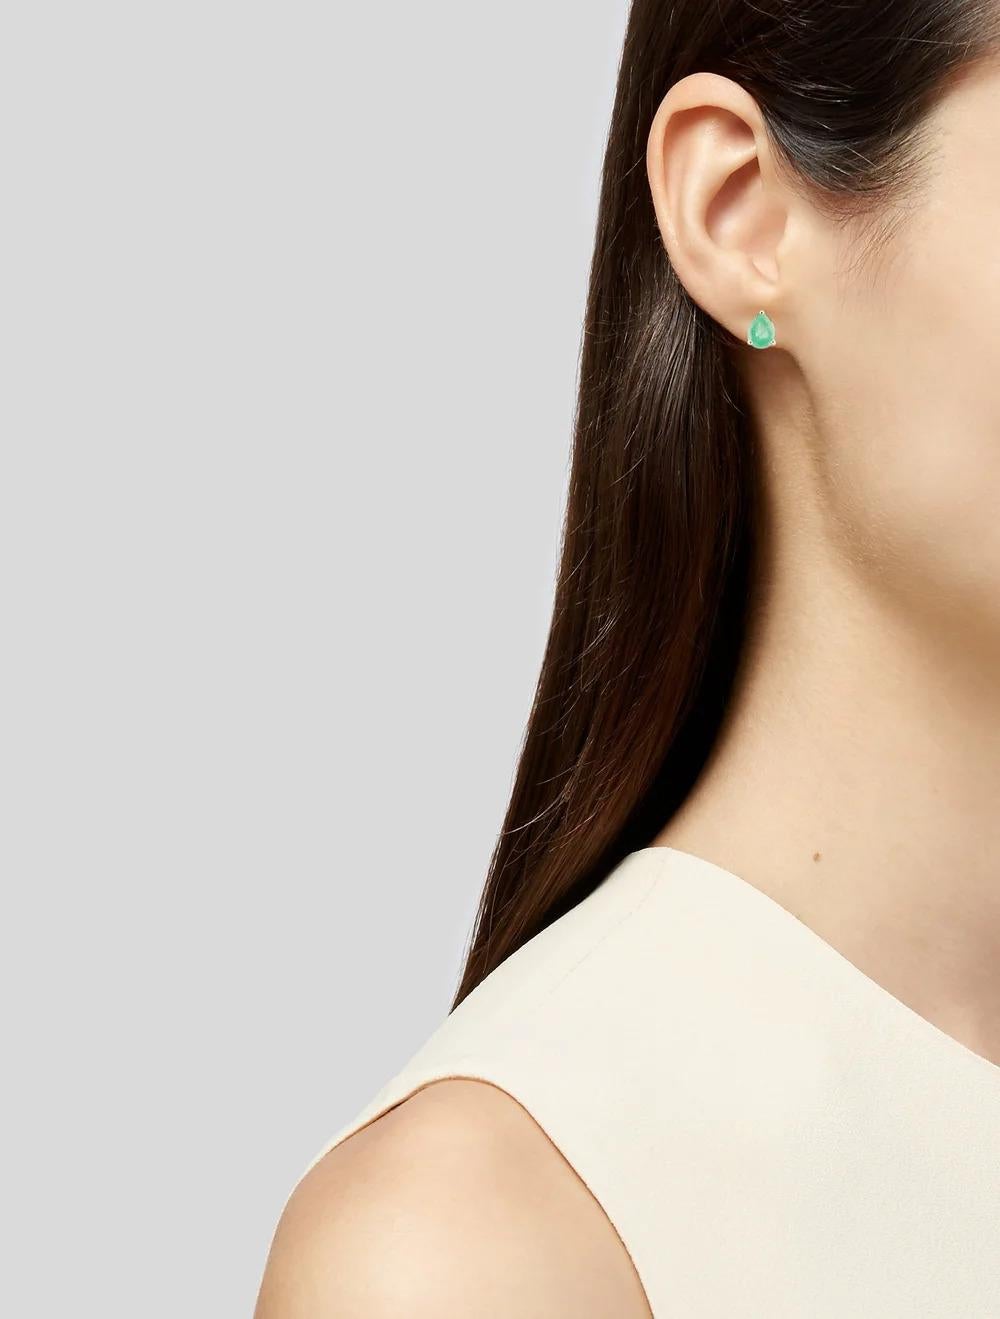 Indulge in the timeless allure of these exquisite 14K Yellow Gold stud earrings, adorned with mesmerizing Pear Modified Brilliant Emerald gemstones. Each earring features a stunning 0.83 Carat Pear Modified Brilliant Emerald, radiating a captivating